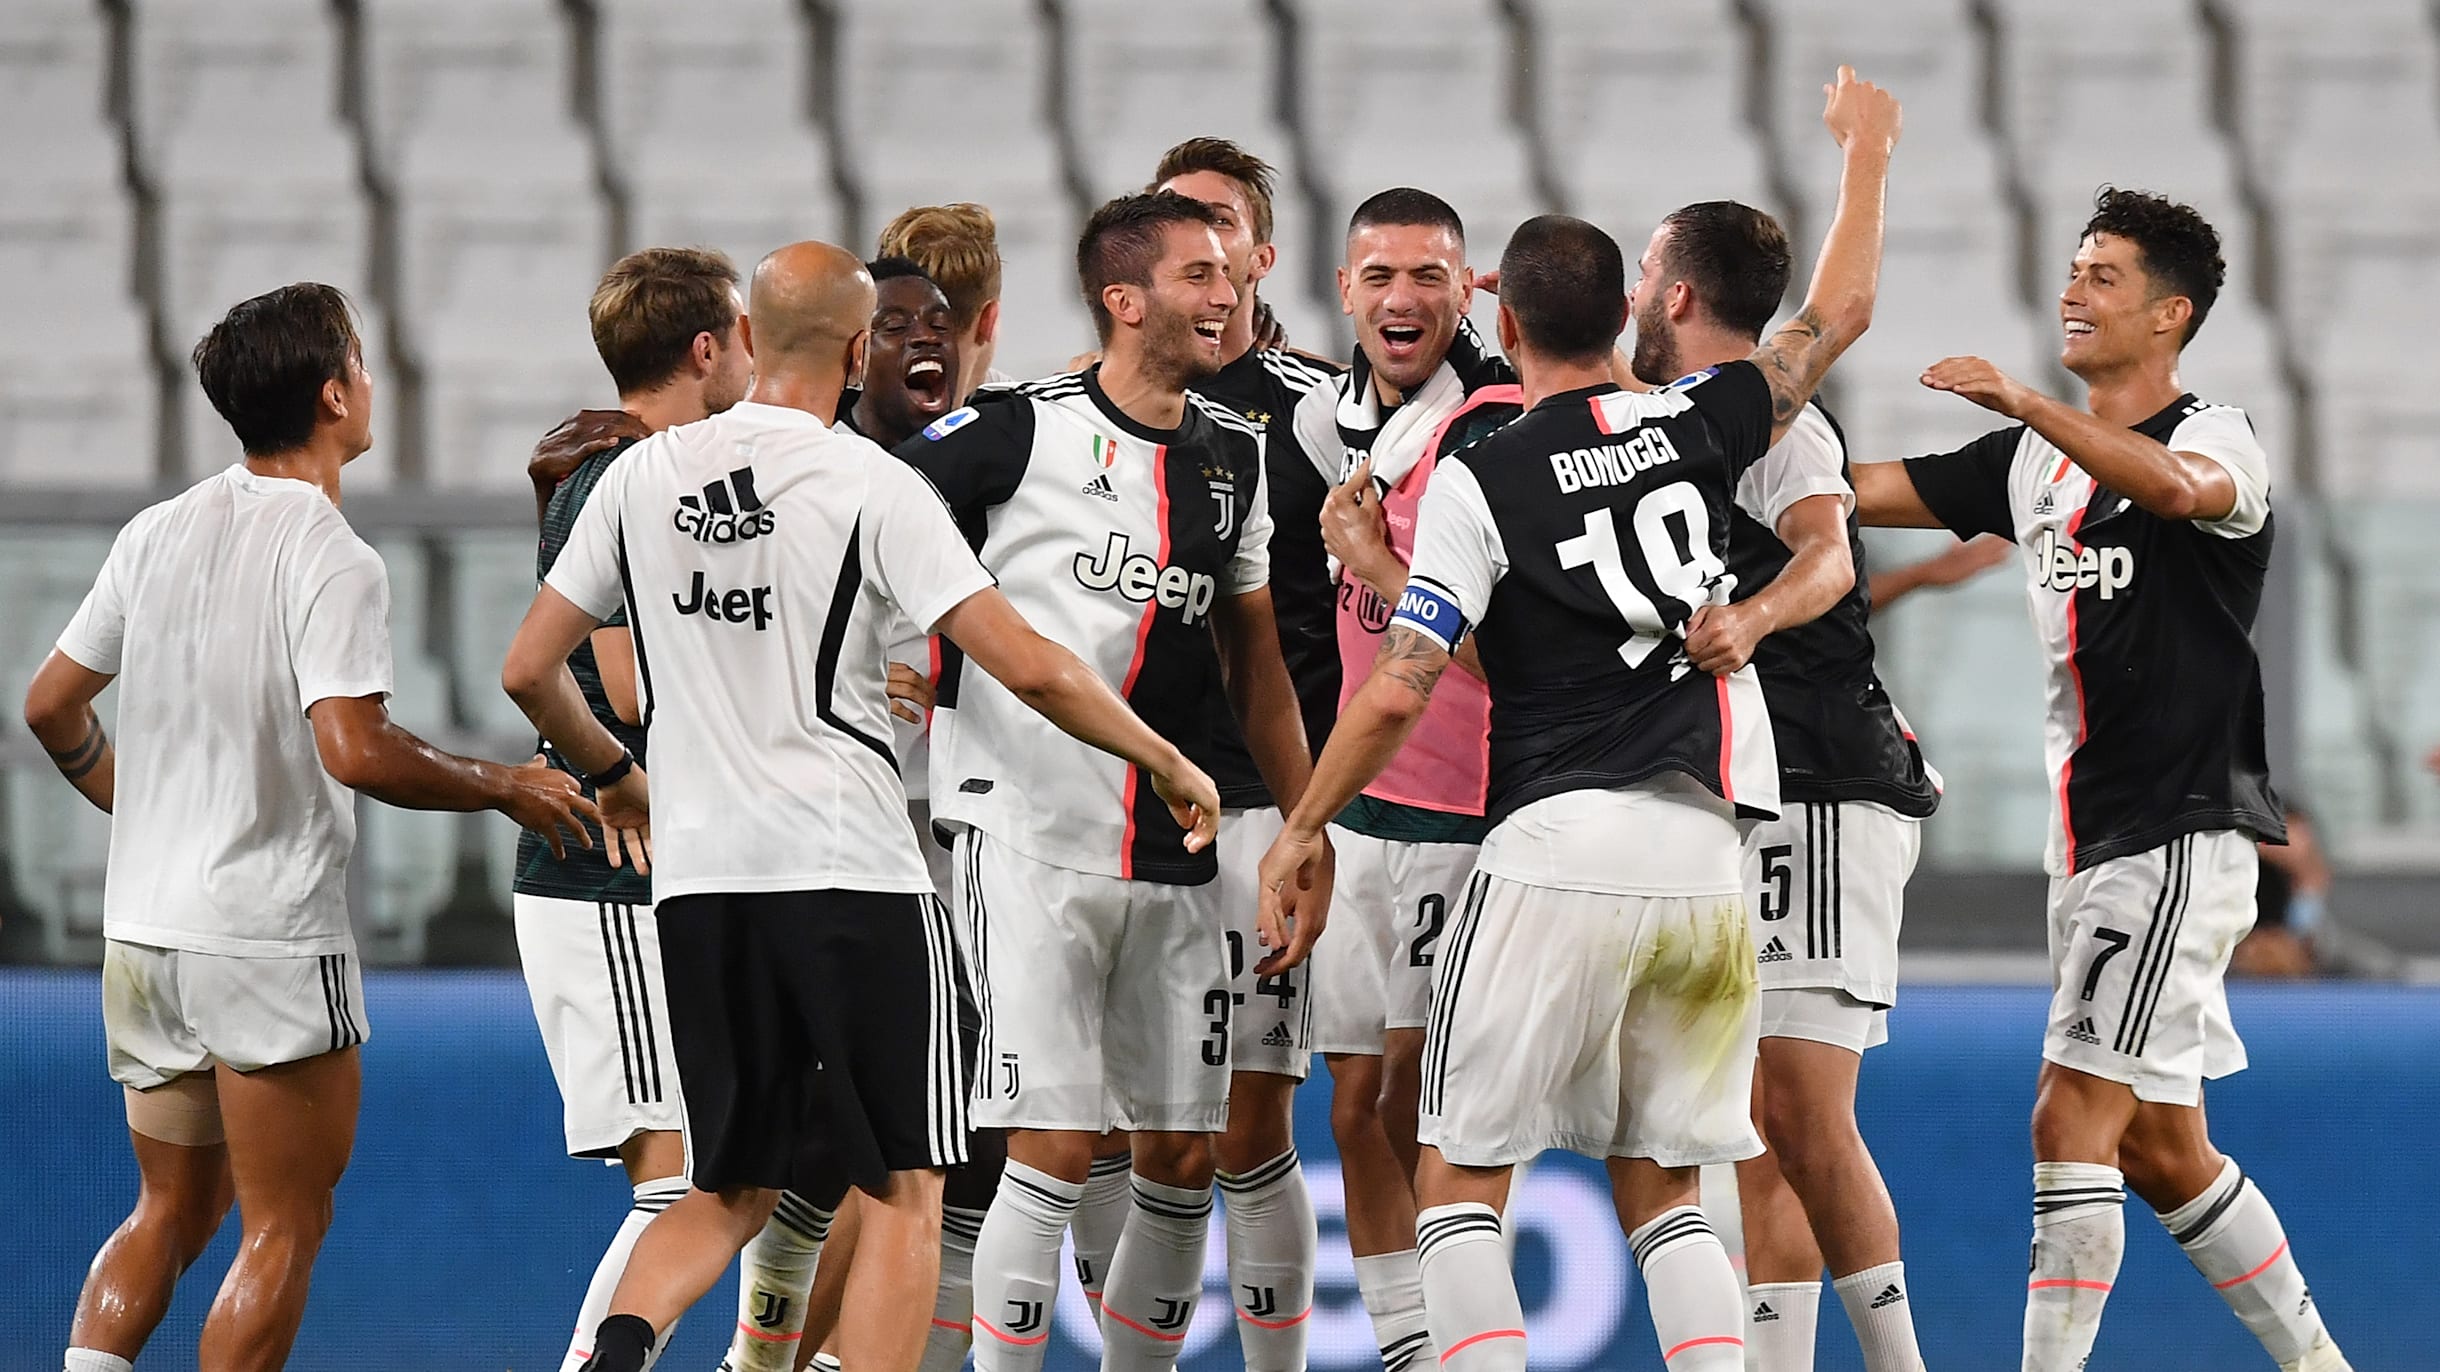 Juventus win Serie A title for ninth consecutive season